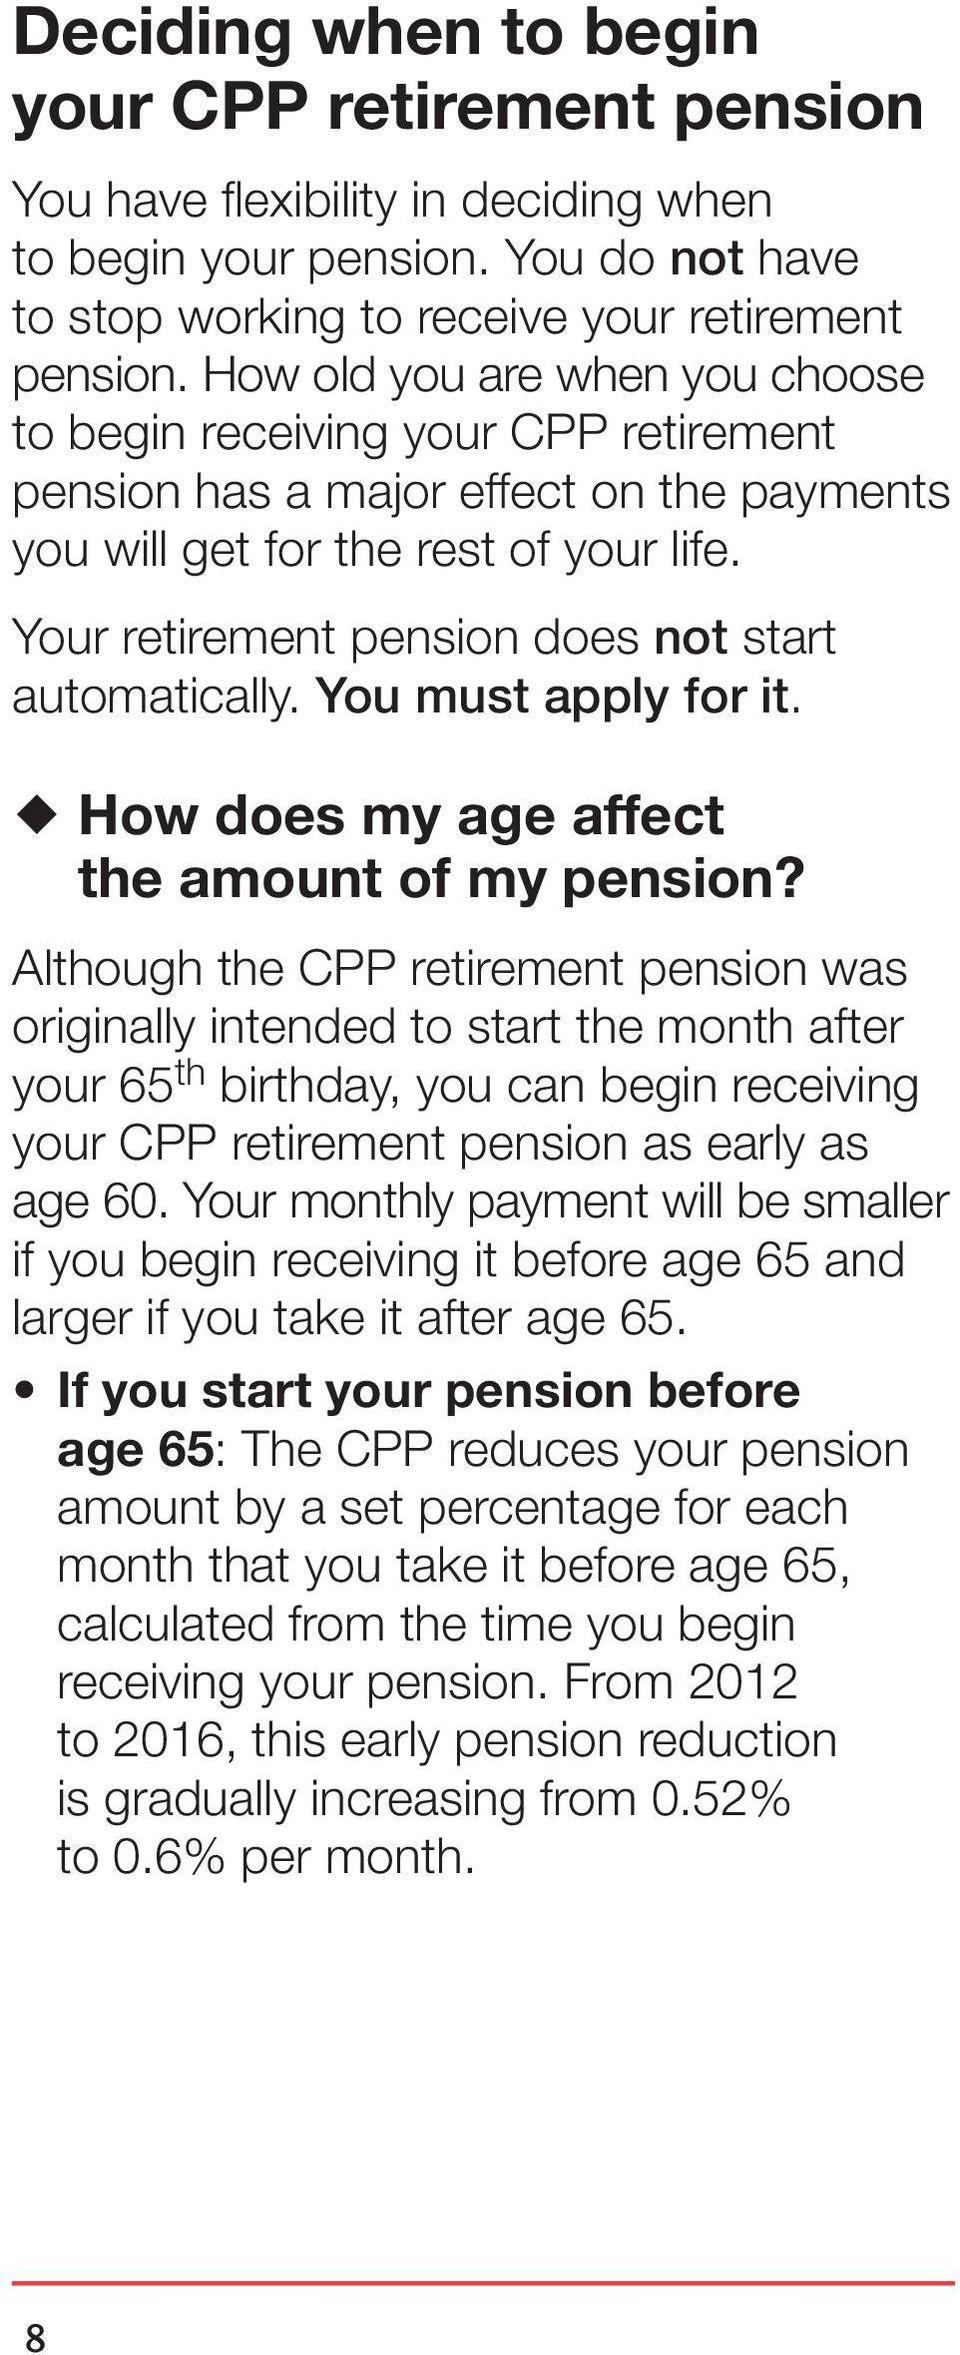 Your retirement pension does not start automatically. You must apply for it. How does my age affect the amount of my pension?